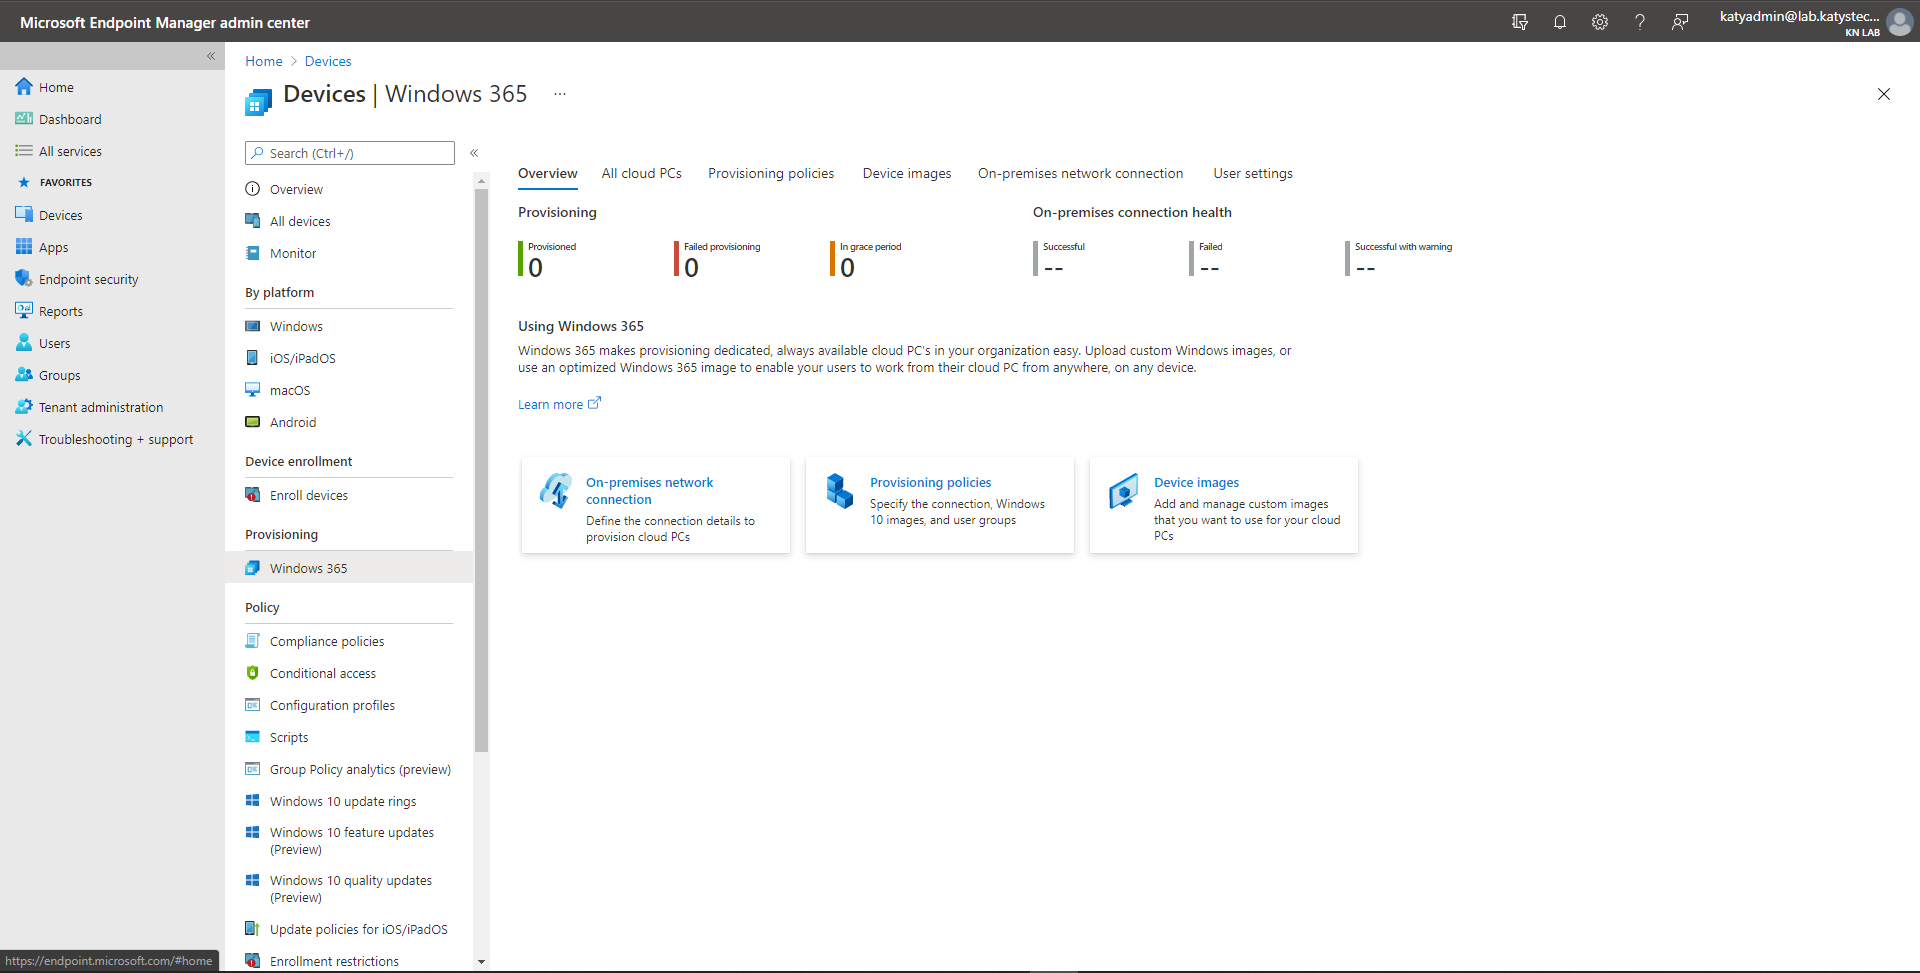 Intune Windows 365 overview page